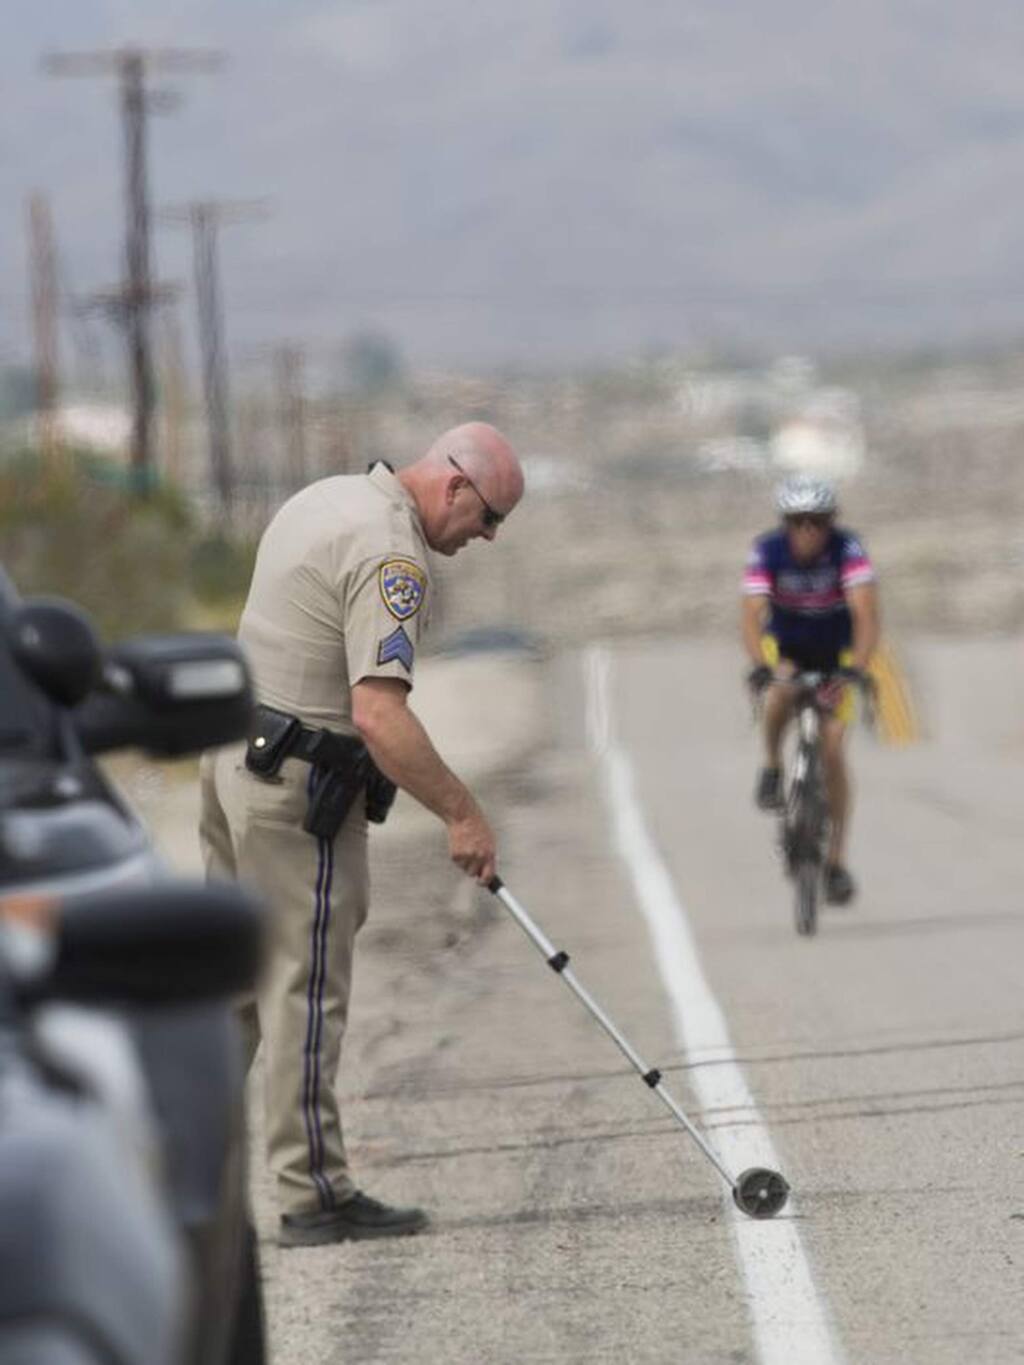 California Highway Patrol investigator takes measurements at the scene where a vehicle struck two cyclists participating in the 2018 Tour de Palm Springs near Indio Hills, Calif., Saturday, Feb. 10, 2018. Police say the car seen was driving down a road at twice the speed limit colliding into cyclists participating in the 100-mile charity bike ride. (Omar Ornelas/The Desert Sun via AP )